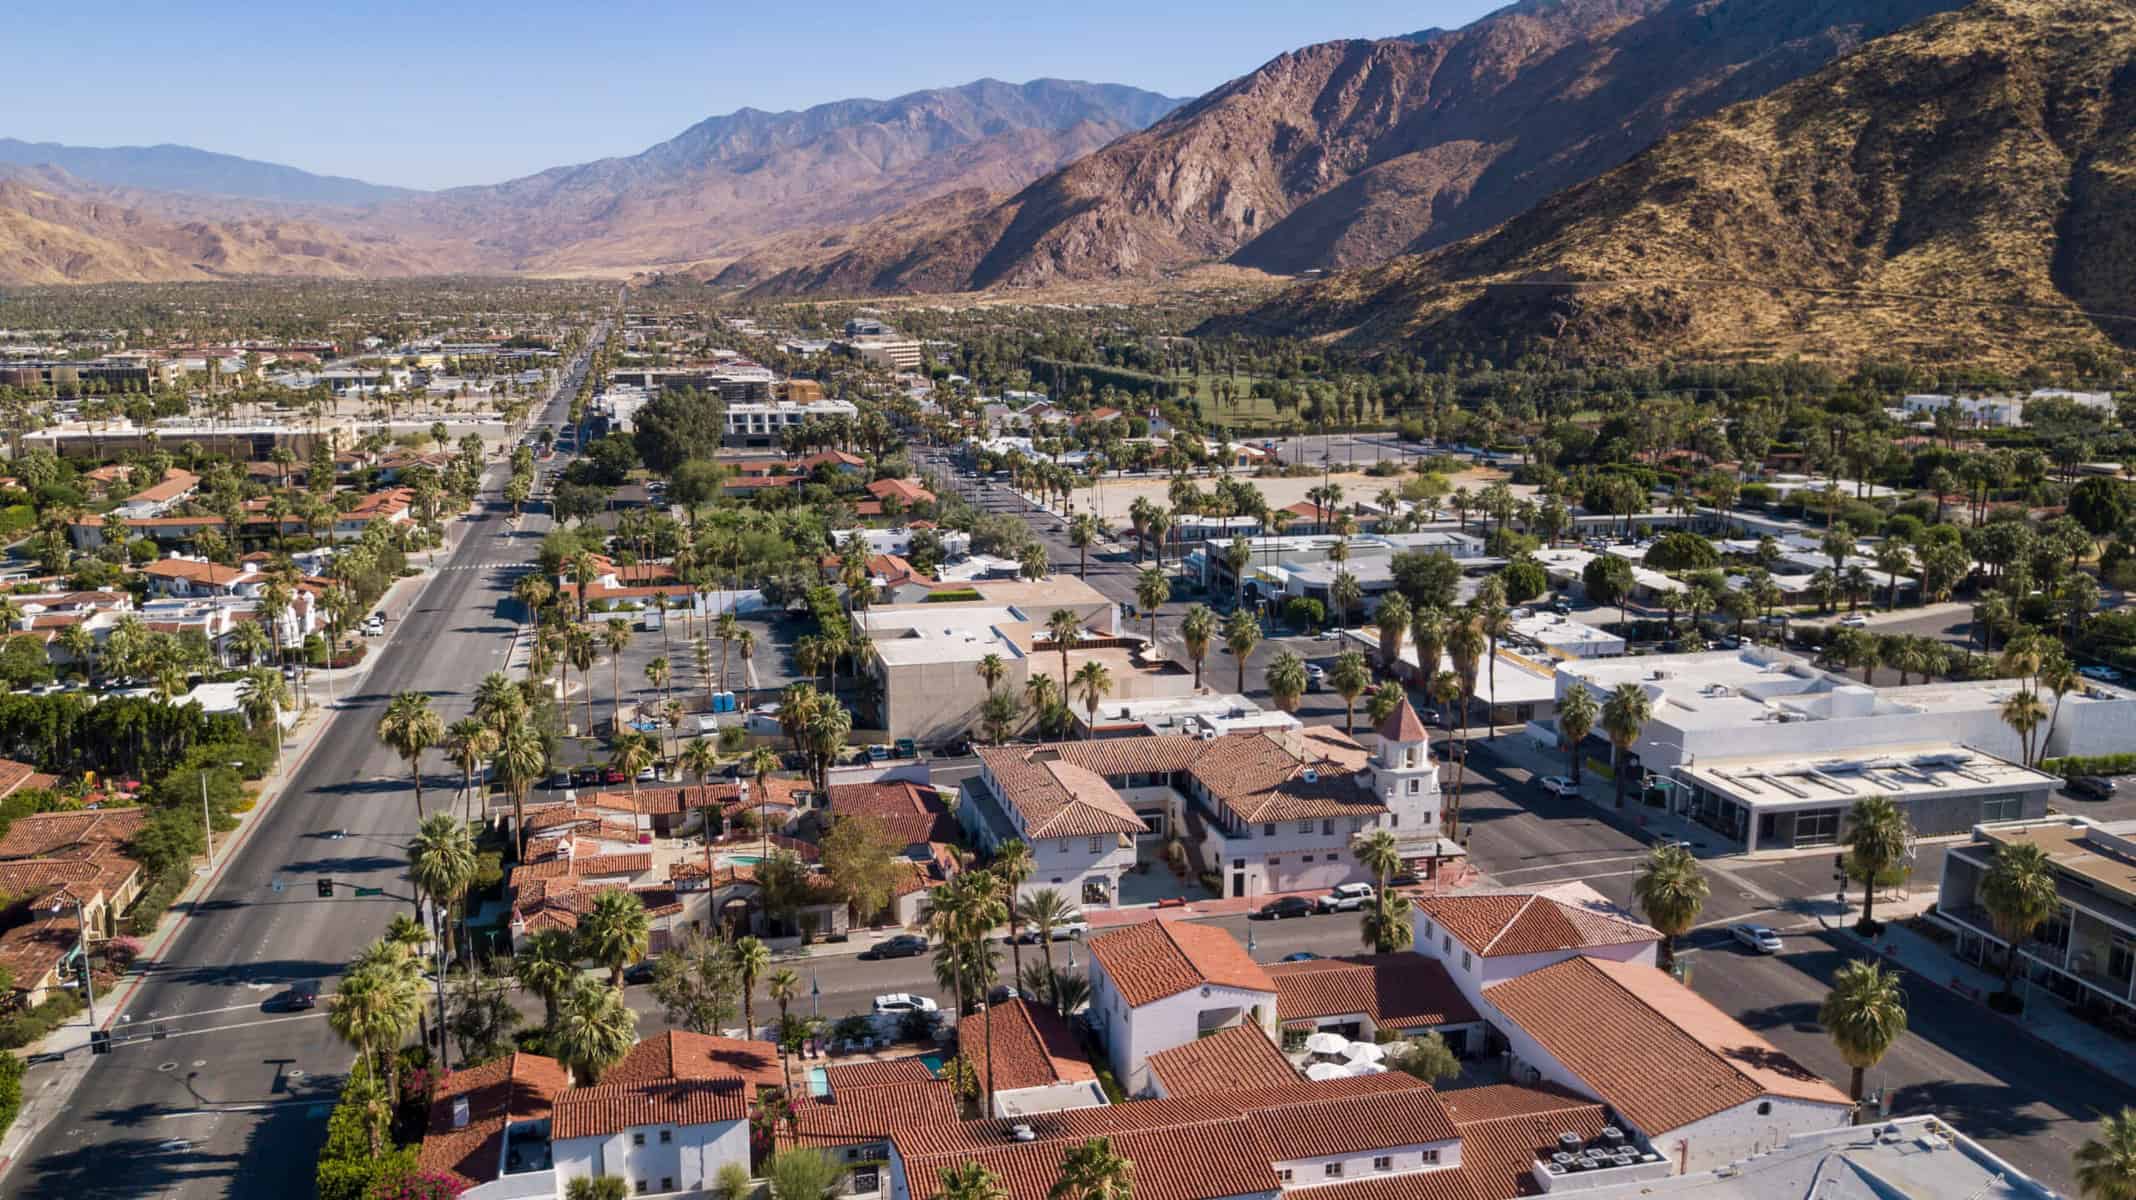 Shop, Dine and Experience El Paseo in Greater Palm Springs